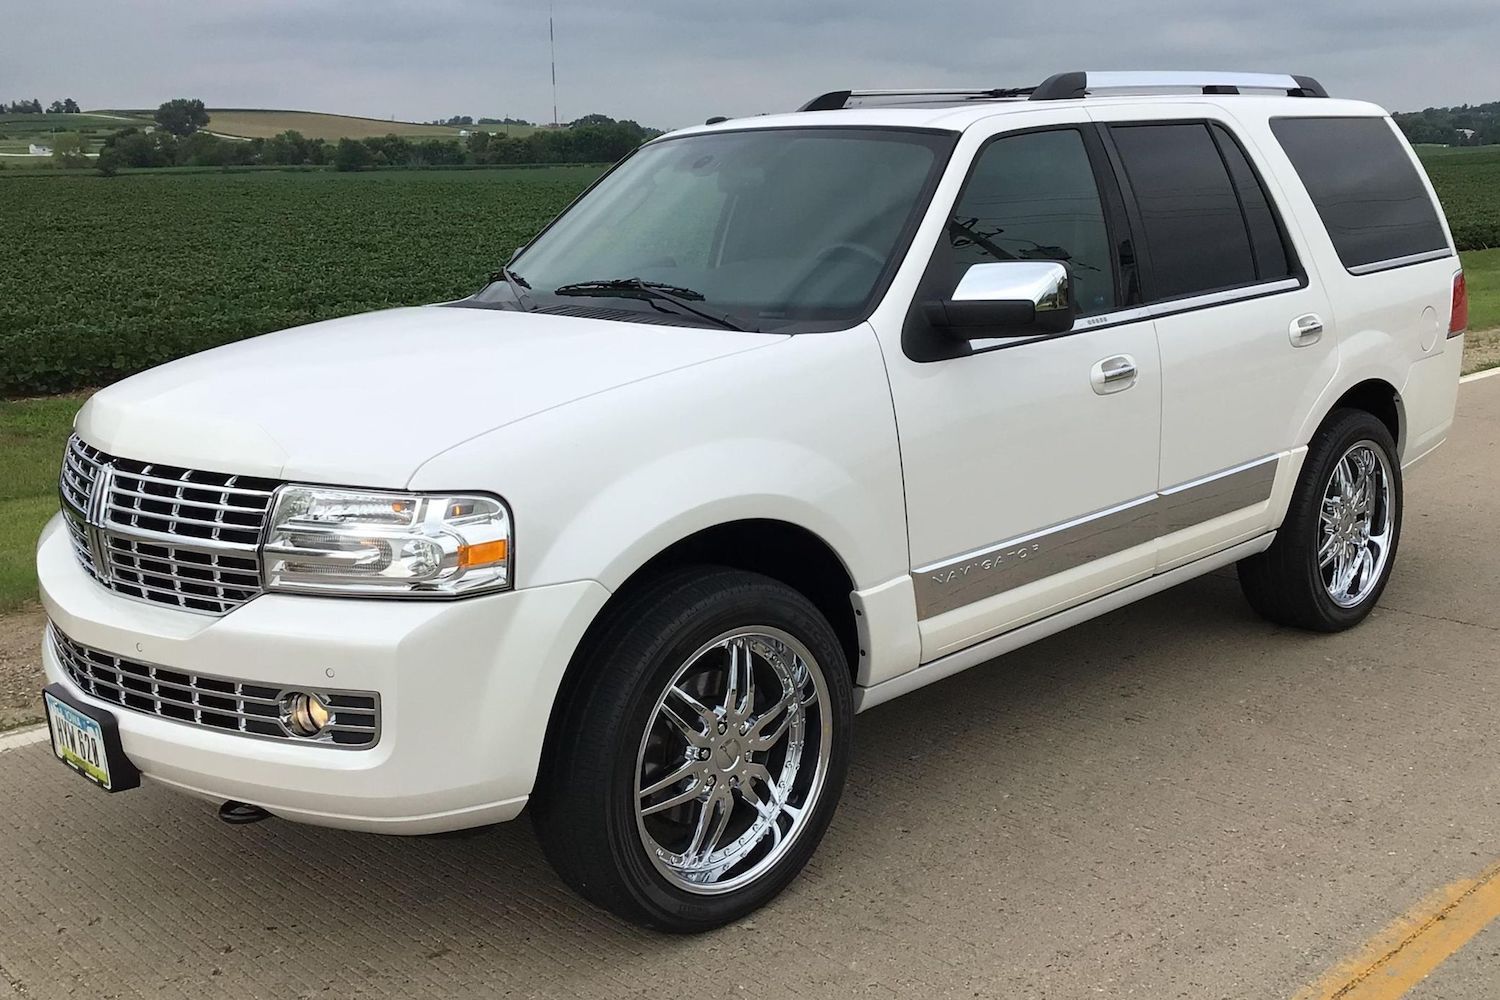 2011 Lincoln Navigator With Just Over 6,000 Miles Up For Auction